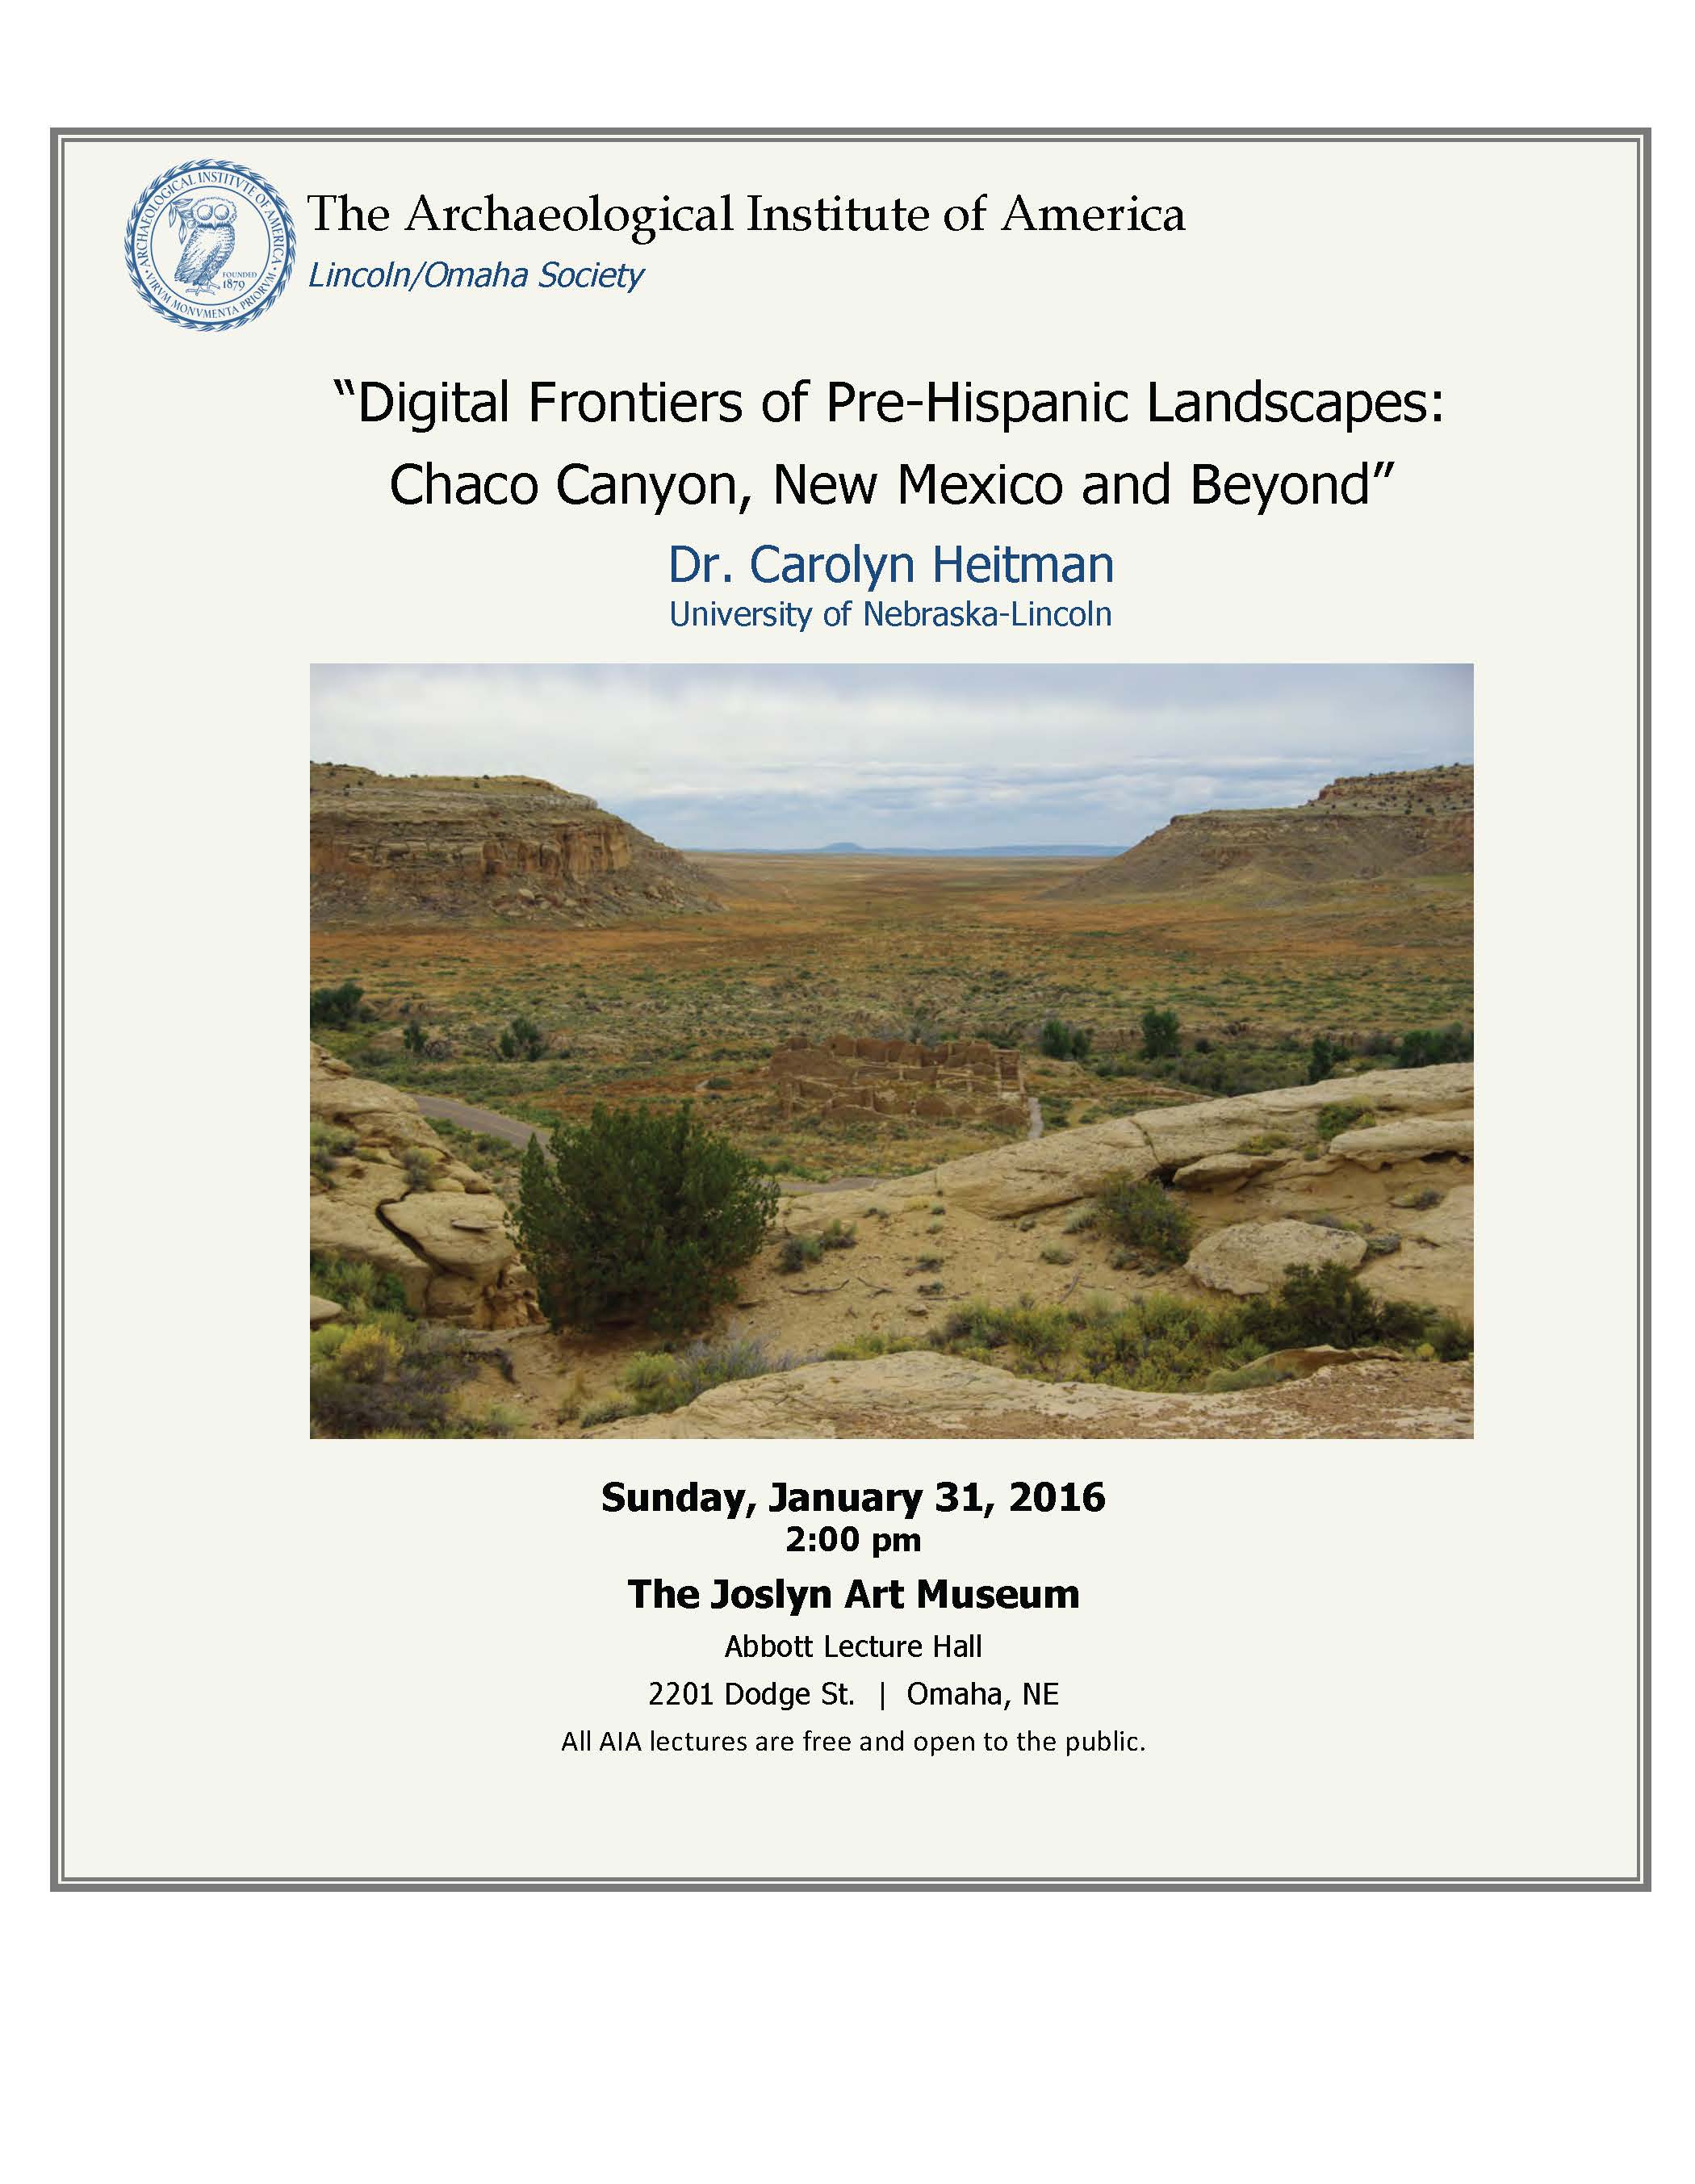 AIA Lecture: Heitman to present lecture on Chaco Canyon on Jan. 31